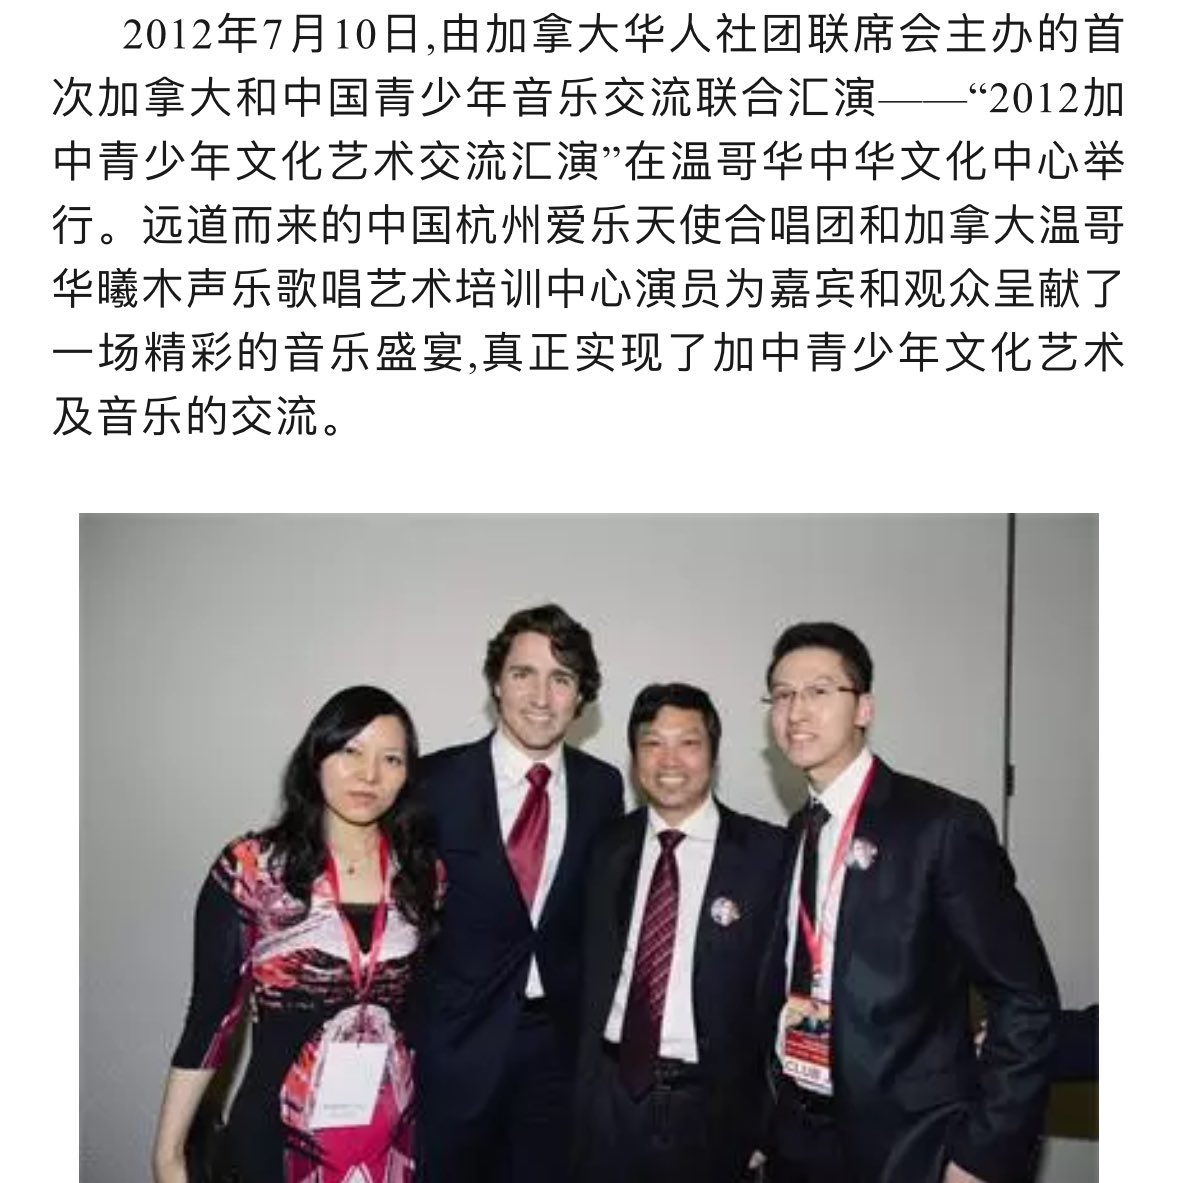 Justin Trudeau appears in a photo in a 2015 article published pre-election with Miaofei Pan, former chair of pro-Beijing CACA, and his wife. Pan held lavish cash access fundraisers at his mansion which later became a crime scene and broke election rules, donating twice the limit.